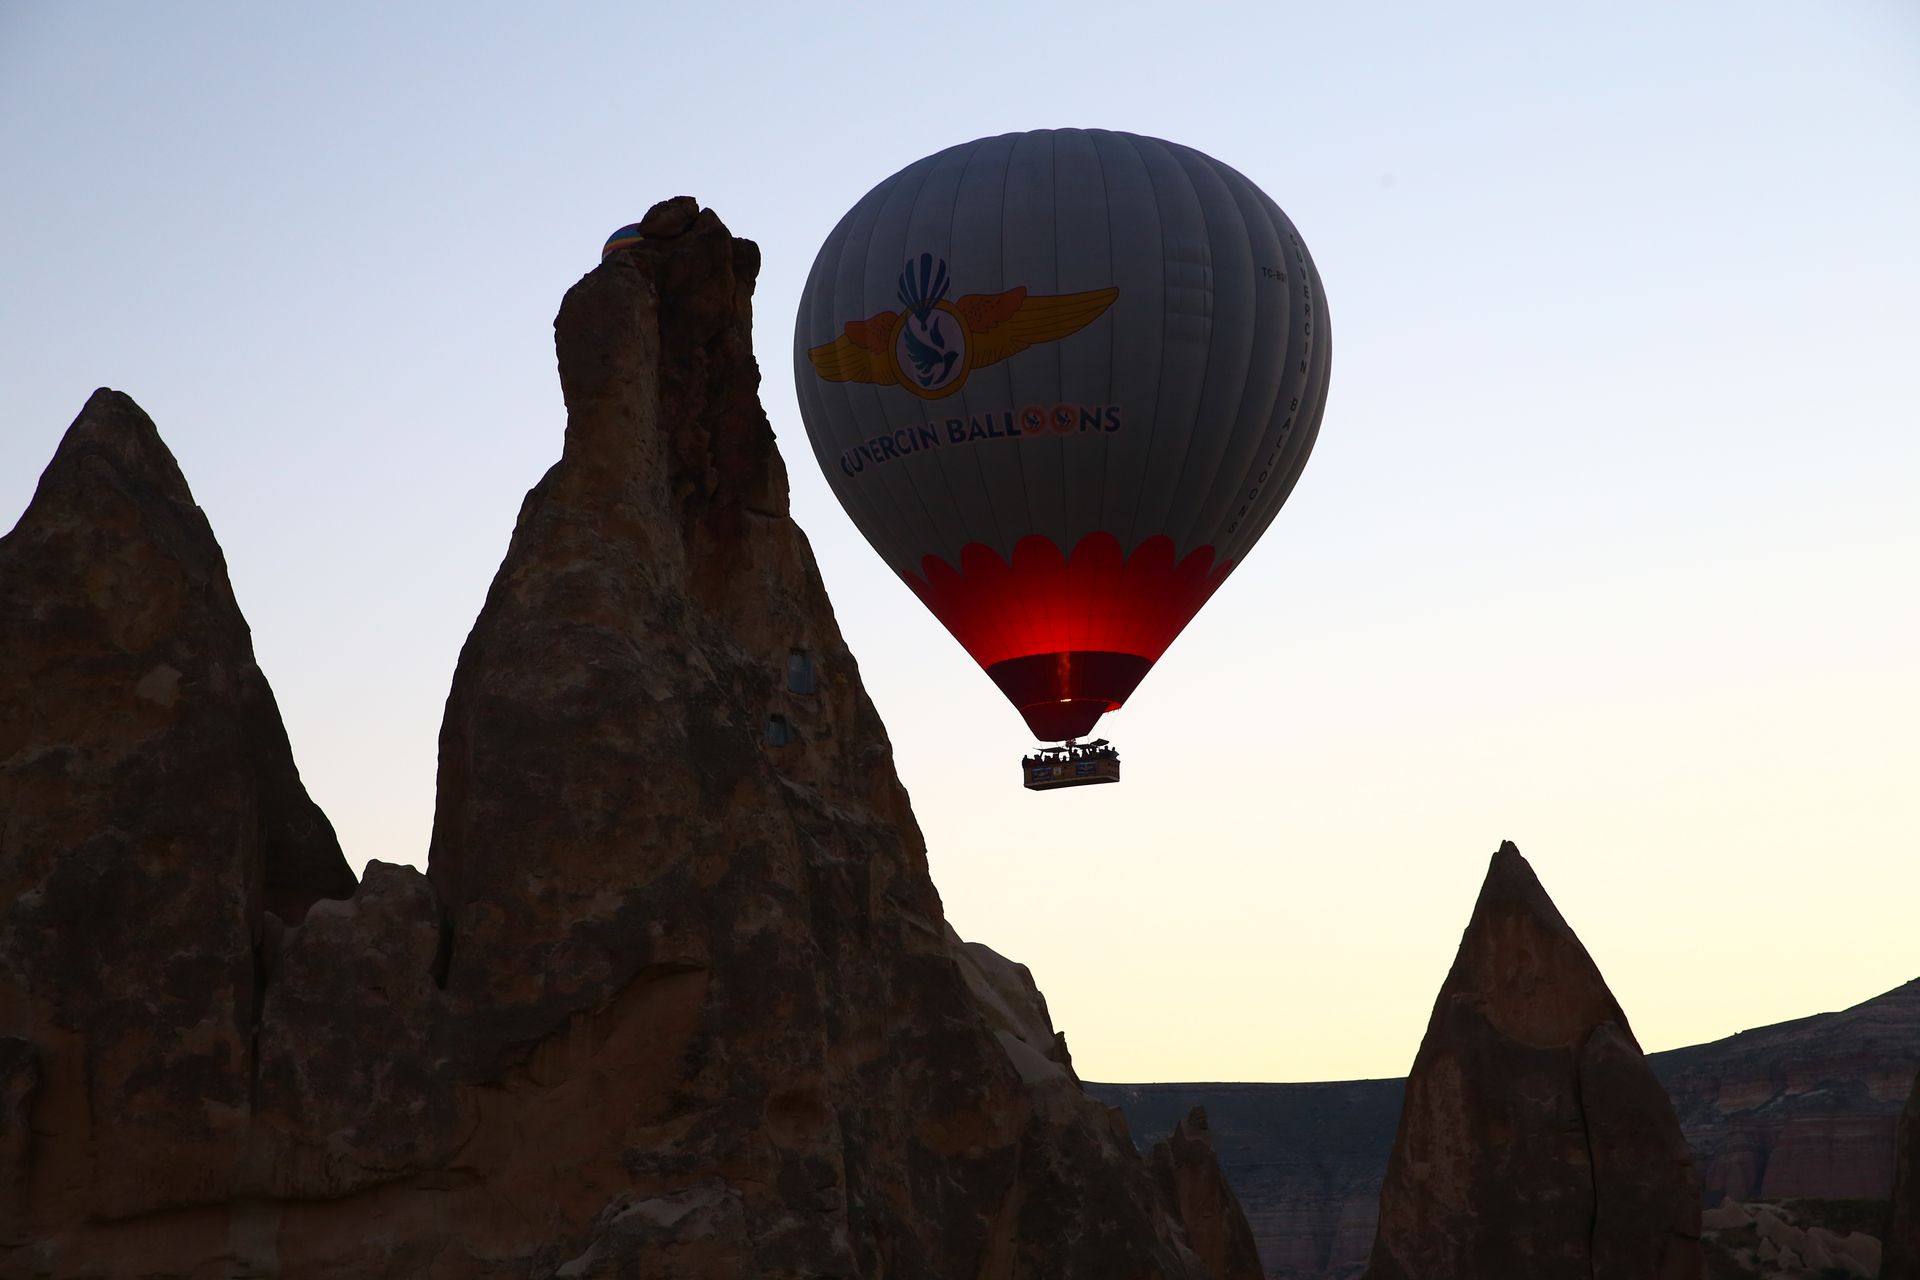 5 People Reportedly Dead After Hot Air Balloon Crash In New Mexico